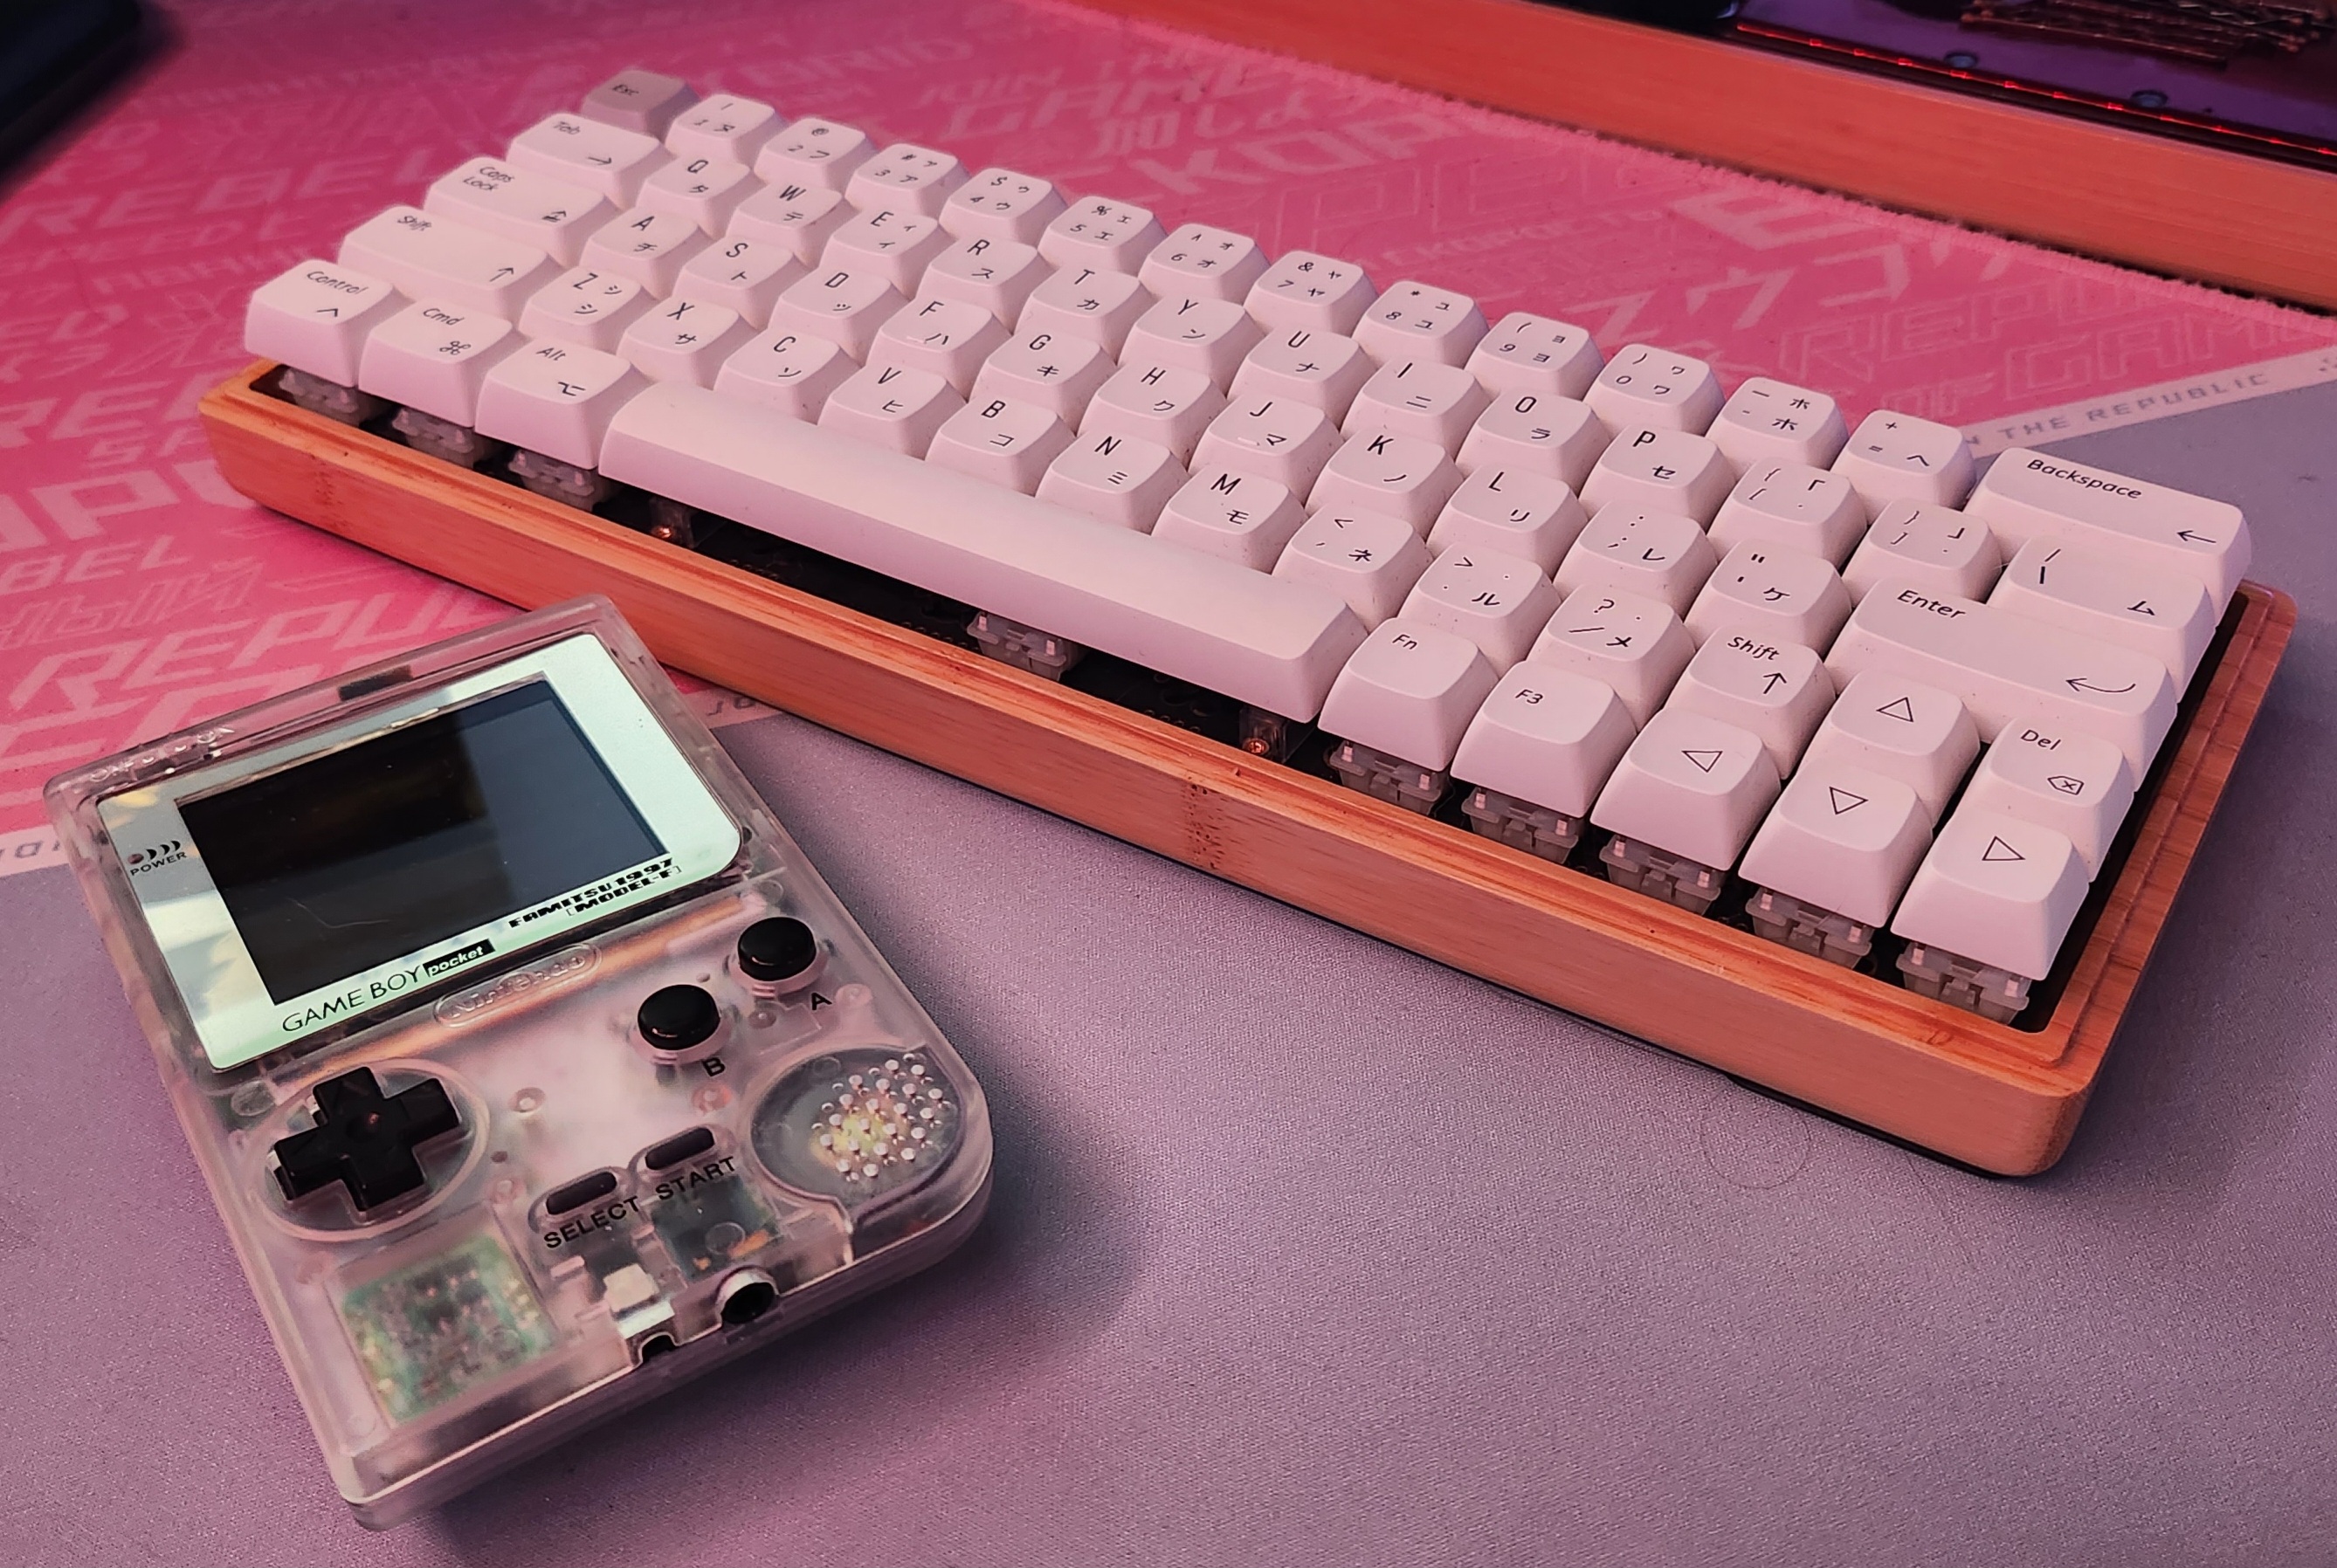 Unfortuntly, the image didn't load! Nevertheless, this would be an image of a Keyboard and Gameboy